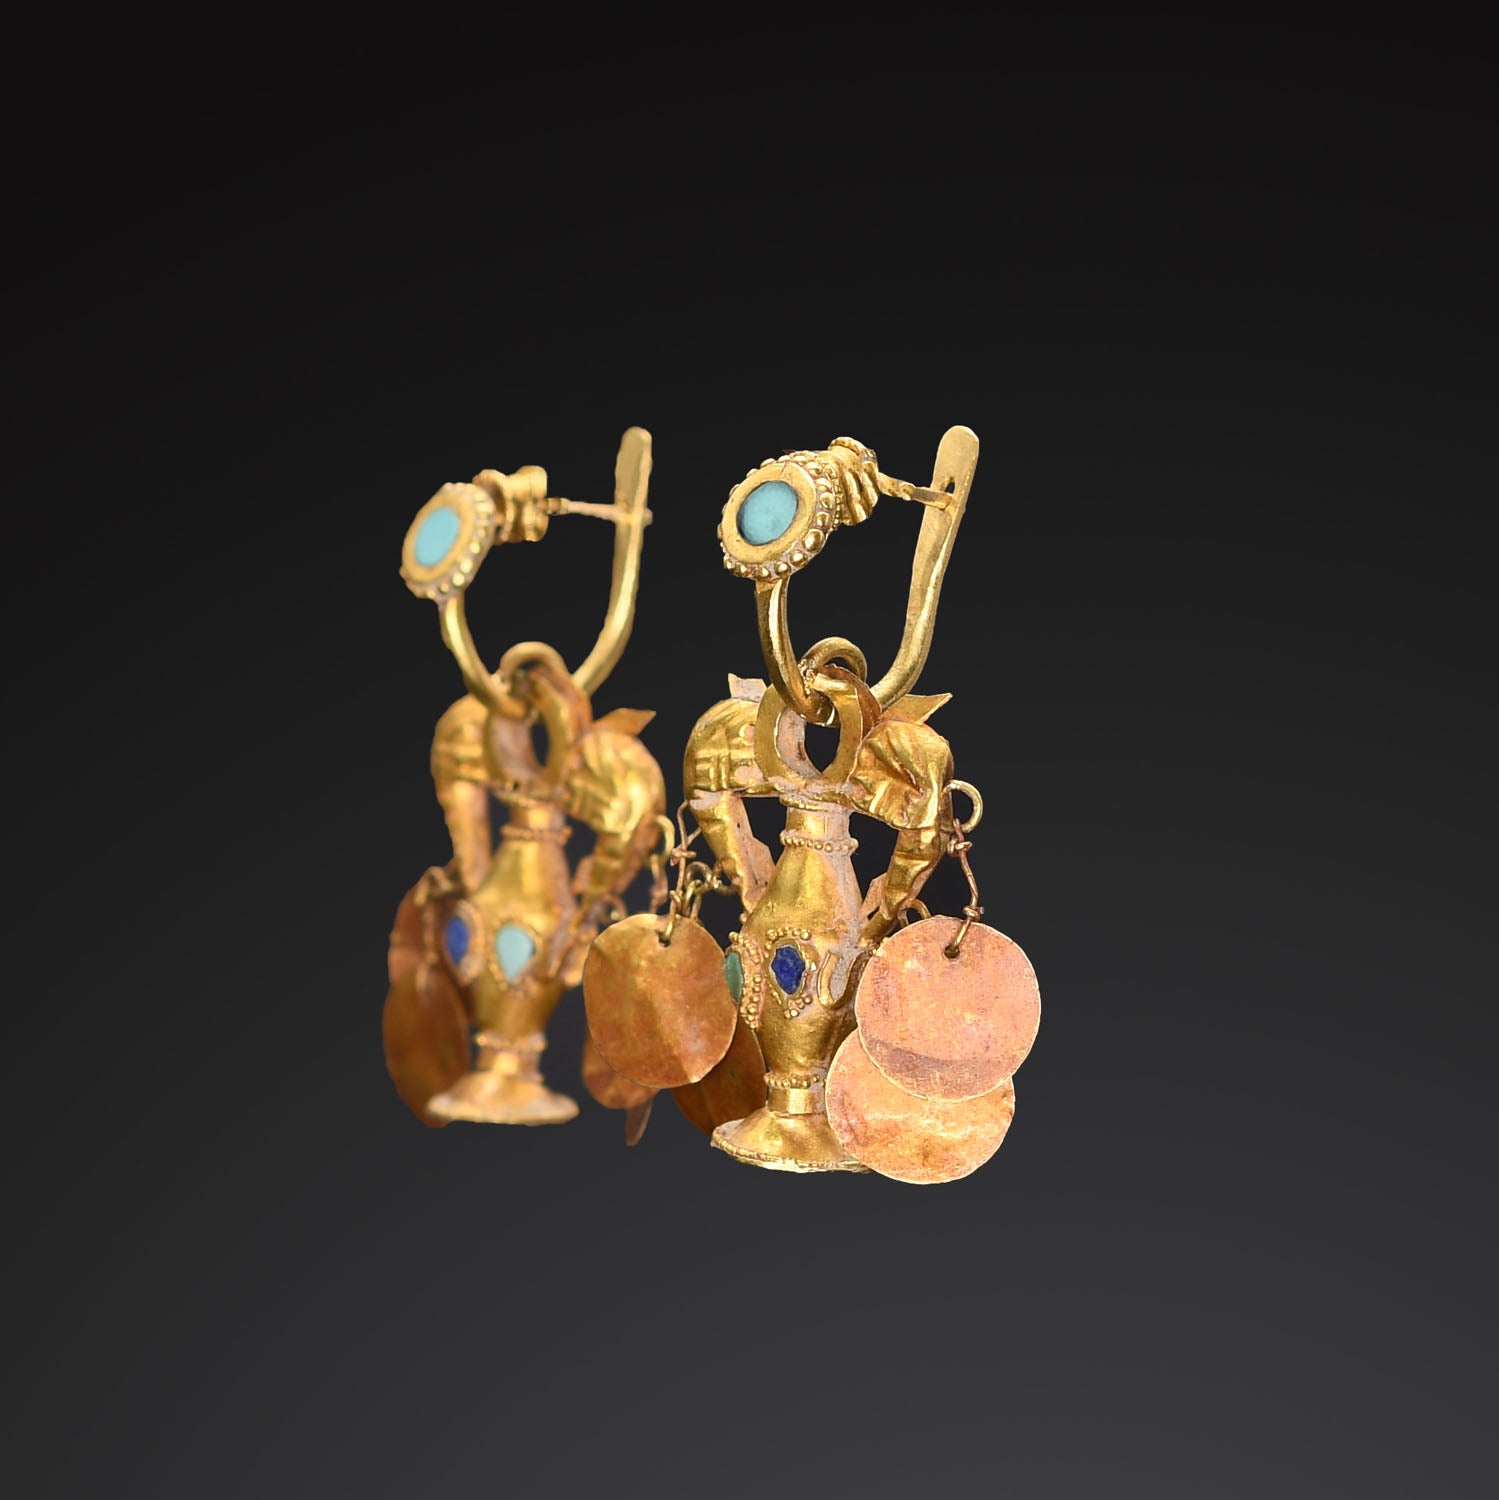 A Pair of East Roman Gold, Turquoise, and Lapis Earrings, Roman Imperial Period, ca. 2nd - 3rd century CE